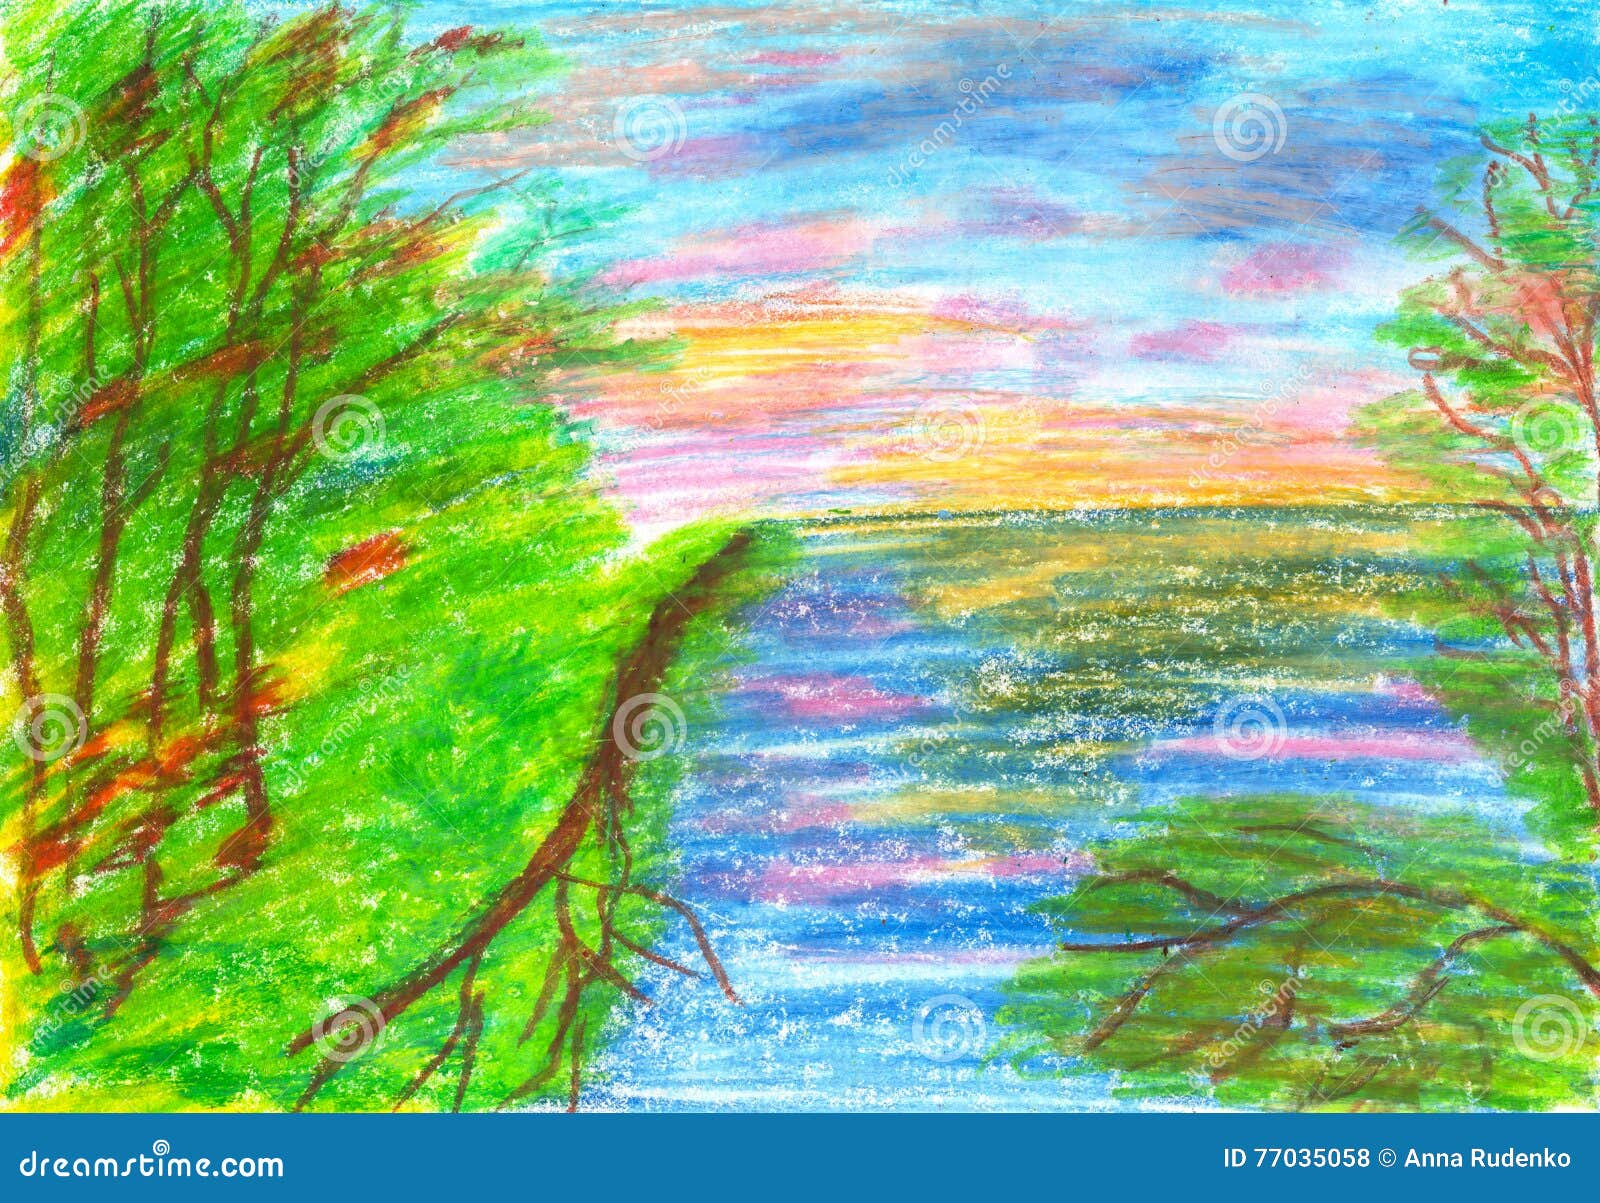 Oil Pastel Drawing || Scenery Drawing || Sunset Scenery Drawing Easy -  YouTube